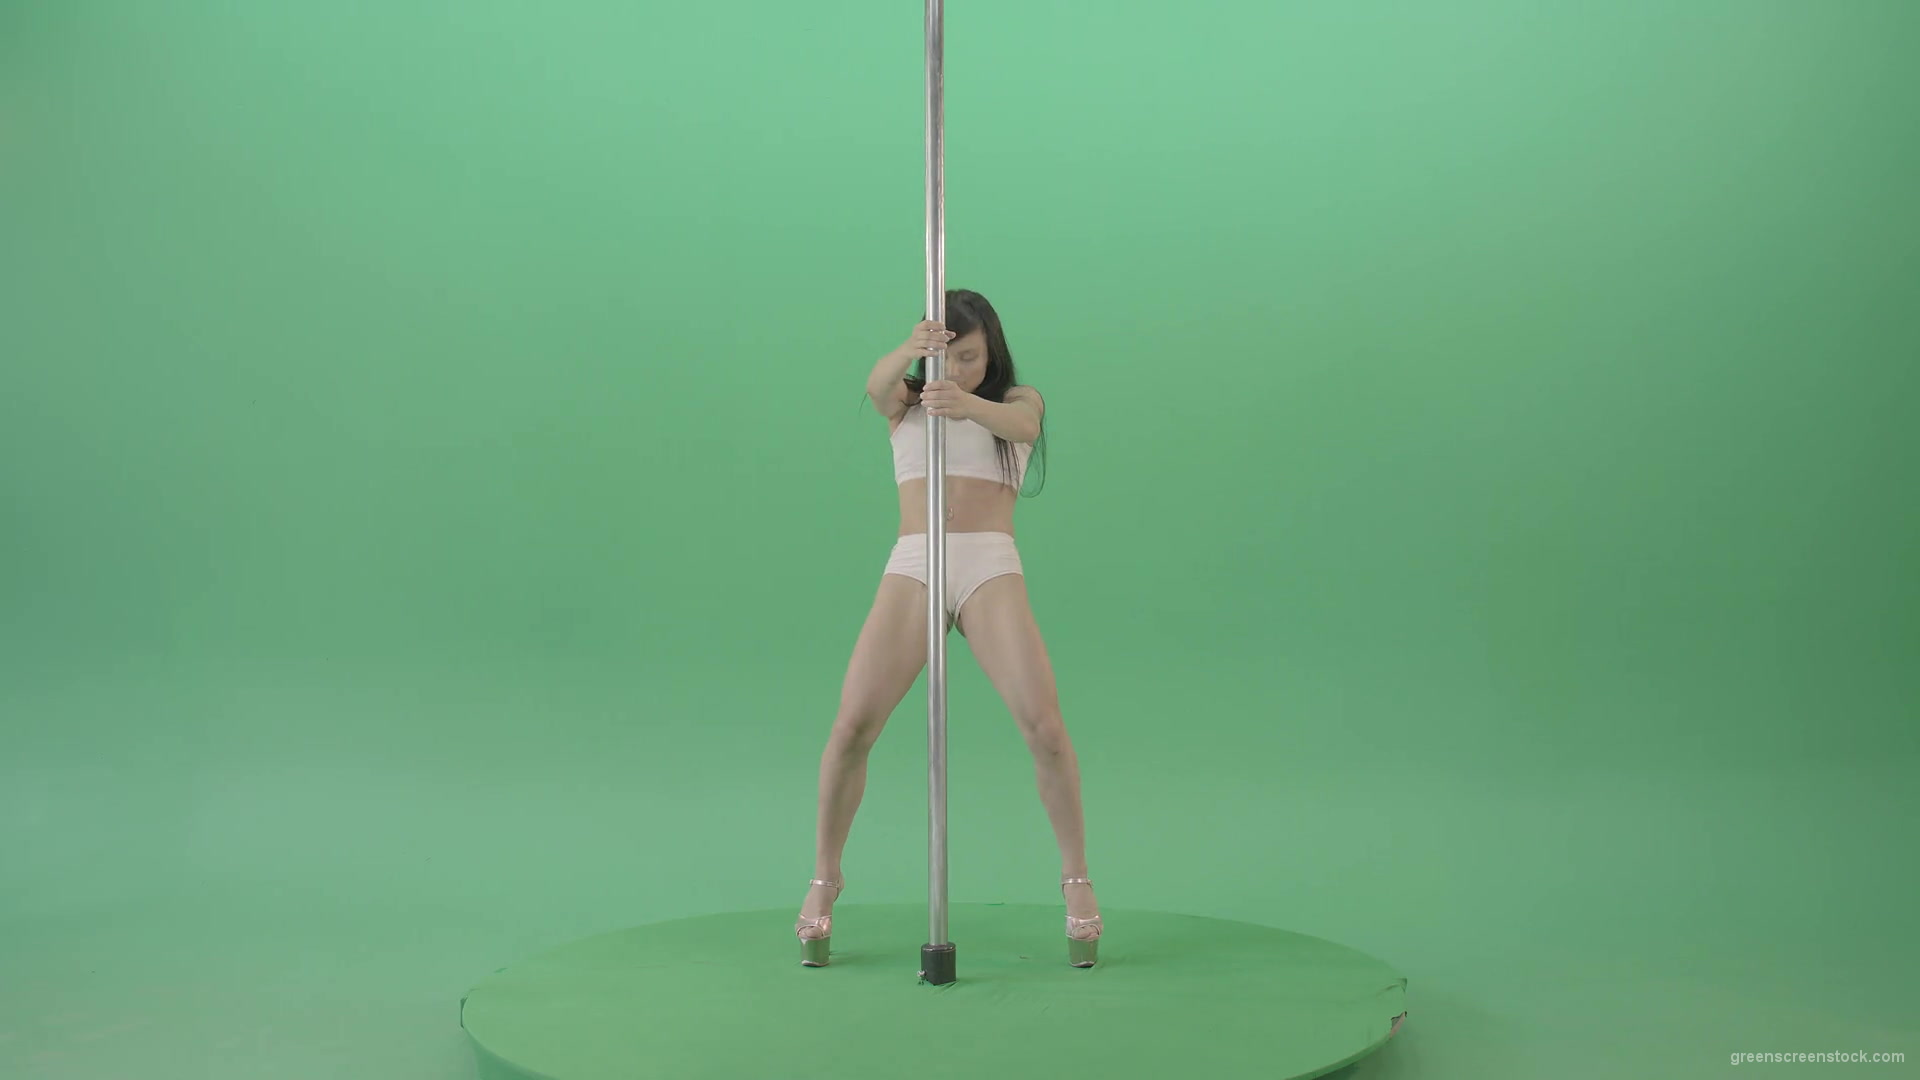 Pole-Dance-sport-girl-waving-sexy-body-isolated-on-green-screen-4K-Video-Footage-1920_002 Green Screen Stock